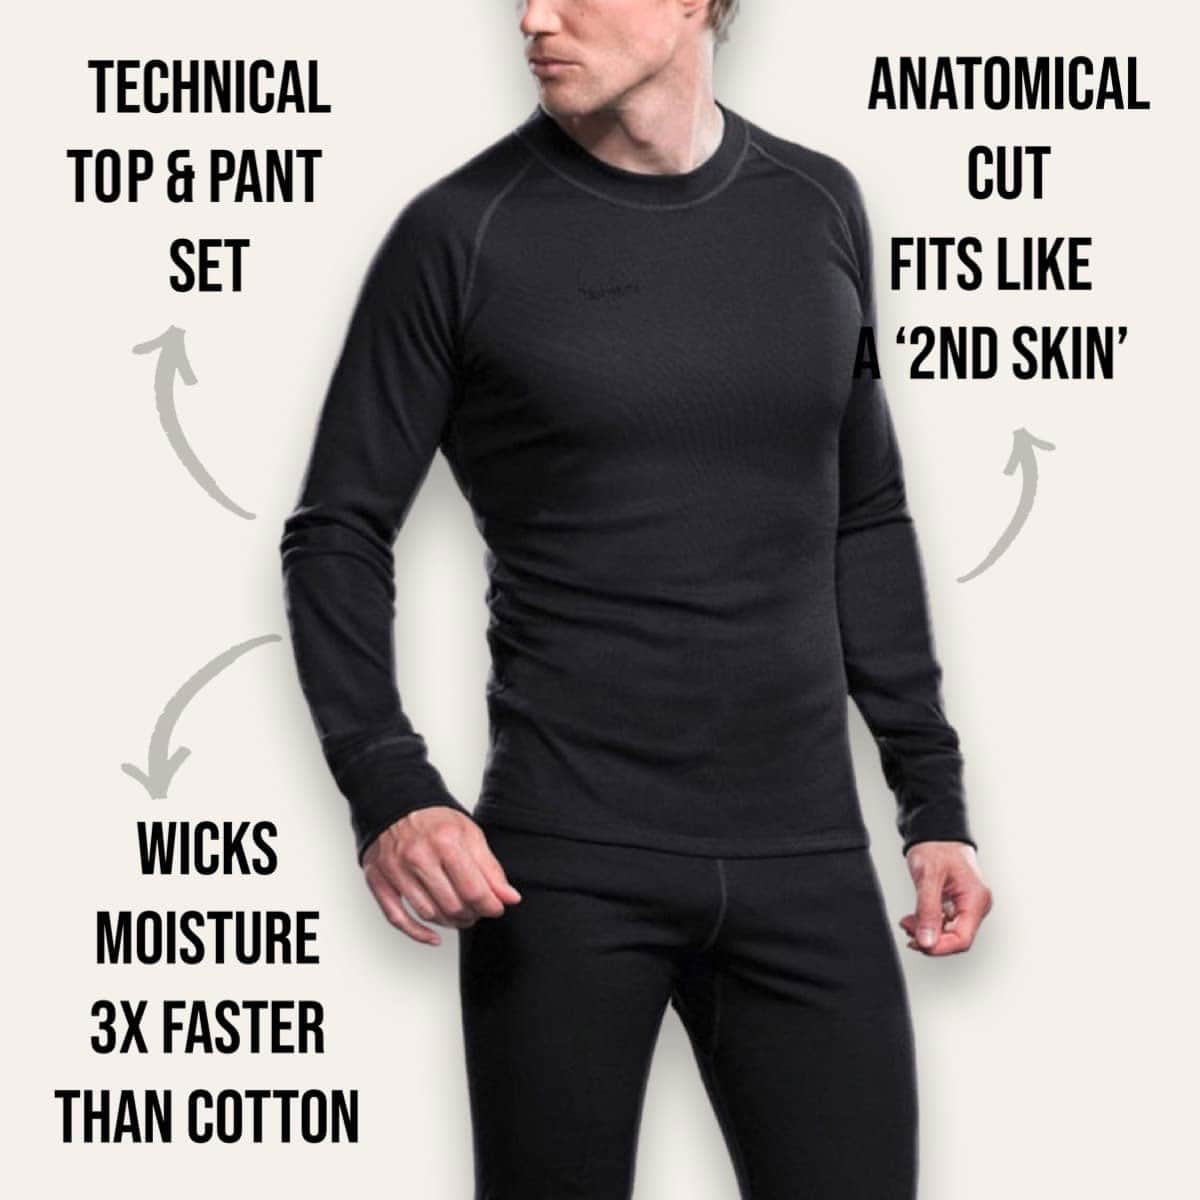 Weise Thermal Base layer Top - Black - FREE UK DELIVERY